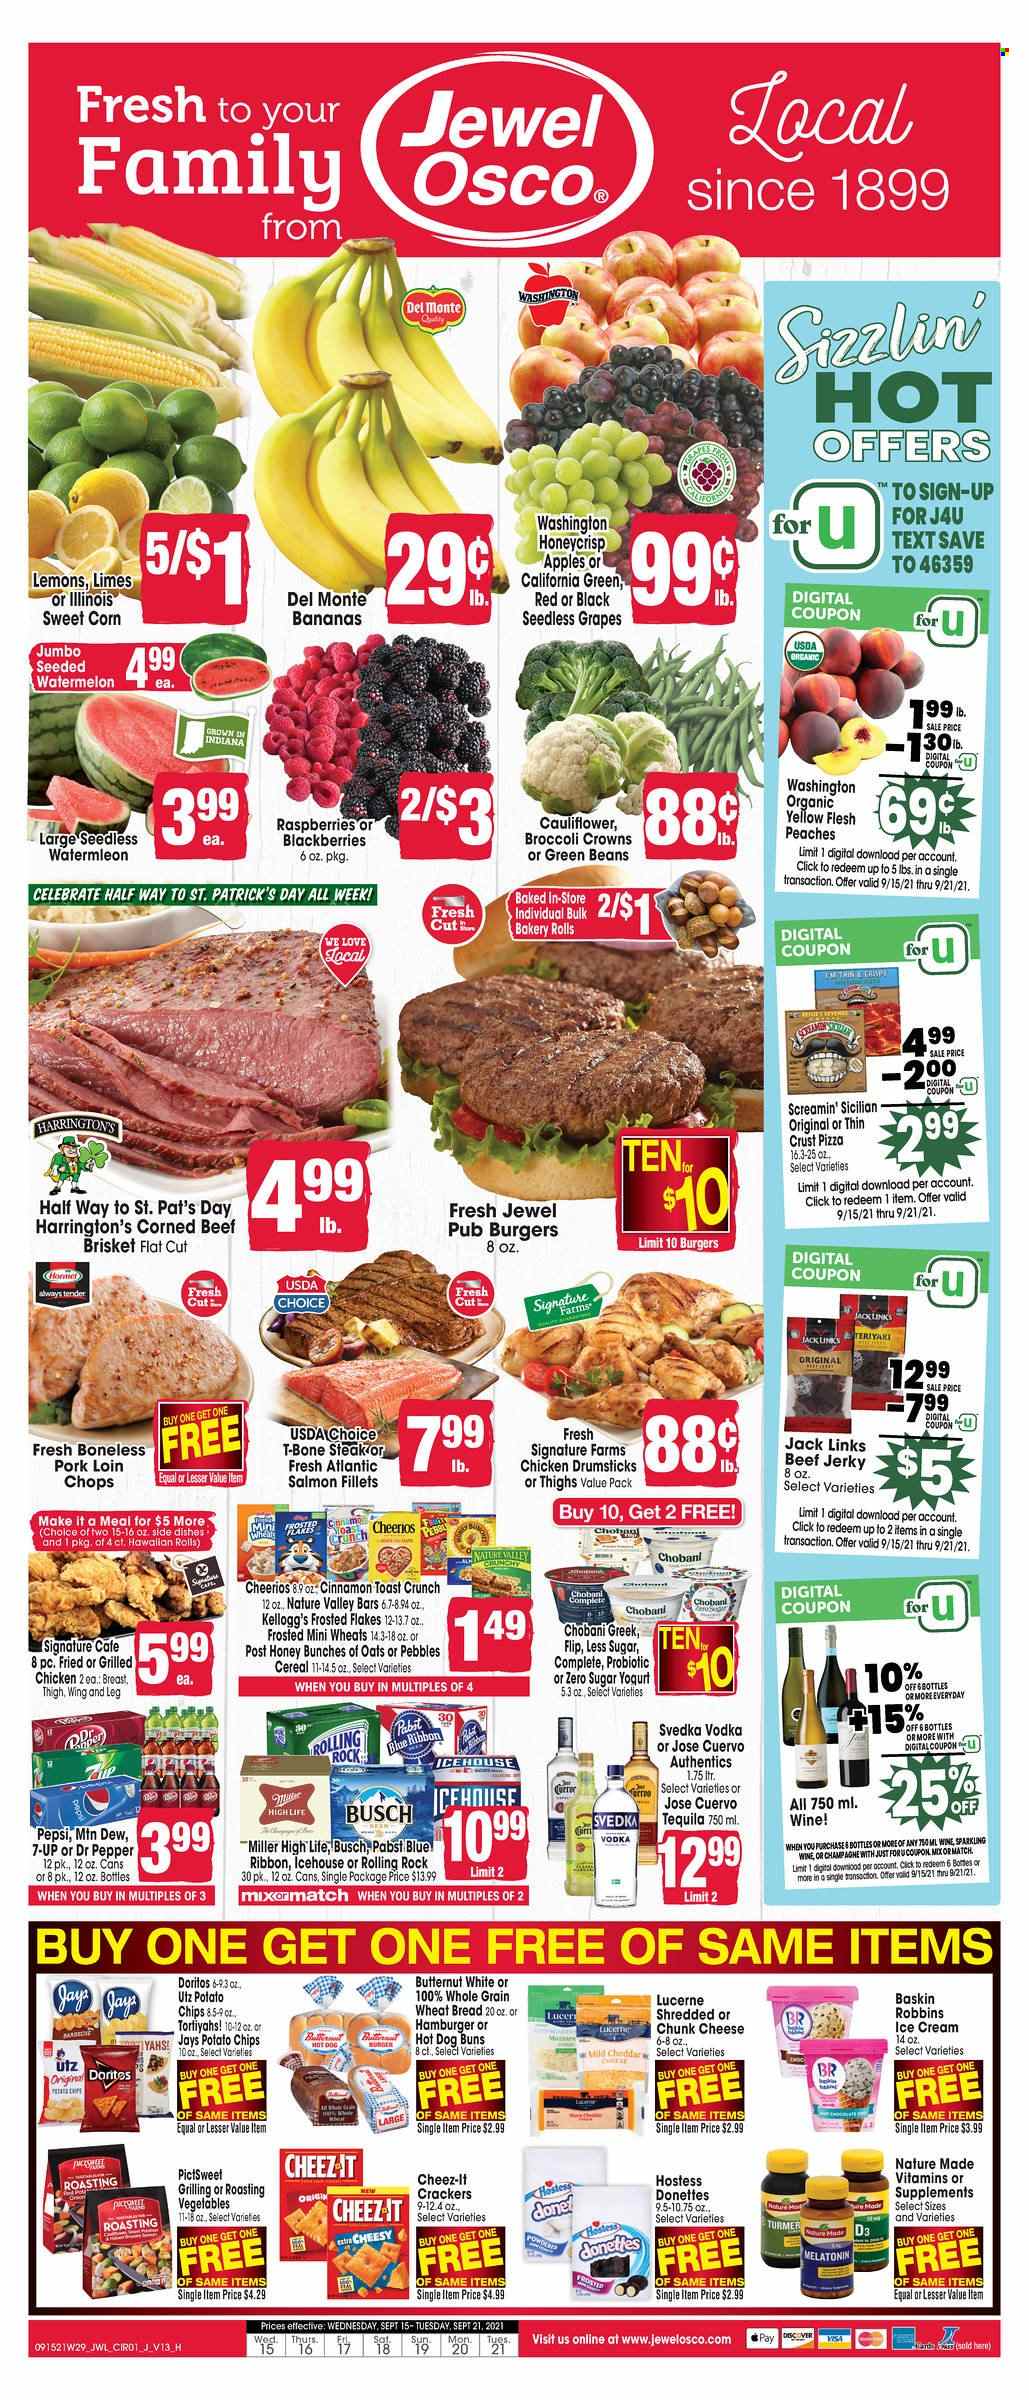 thumbnail - Jewel Osco Flyer - 09/15/2021 - 09/21/2021 - Sales products - seedless grapes, wheat bread, buns, beans, corn, green beans, sweet corn, apples, grapes, limes, watermelon, salmon, salmon fillet, pizza, beef jerky, jerky, corned beef, chunk cheese, yoghurt, Chobani, ice cream, Screamin' Sicilian, crackers, Kellogg's, Doritos, potato chips, chips, Cheez-It, cereals, Cheerios, Frosted Flakes, Nature Valley, cinnamon, Mountain Dew, Pepsi, Dr. Pepper, 7UP, champagne, wine, tequila, vodka, Busch, Miller, Pabst Blue Ribbon, chicken drumsticks, beef meat, t-bone steak, steak, beef brisket, pork chops, pork loin, pork meat, Melatonin, Nature Made, vitamin D3, butternut squash, lemons, peaches. Page 1.